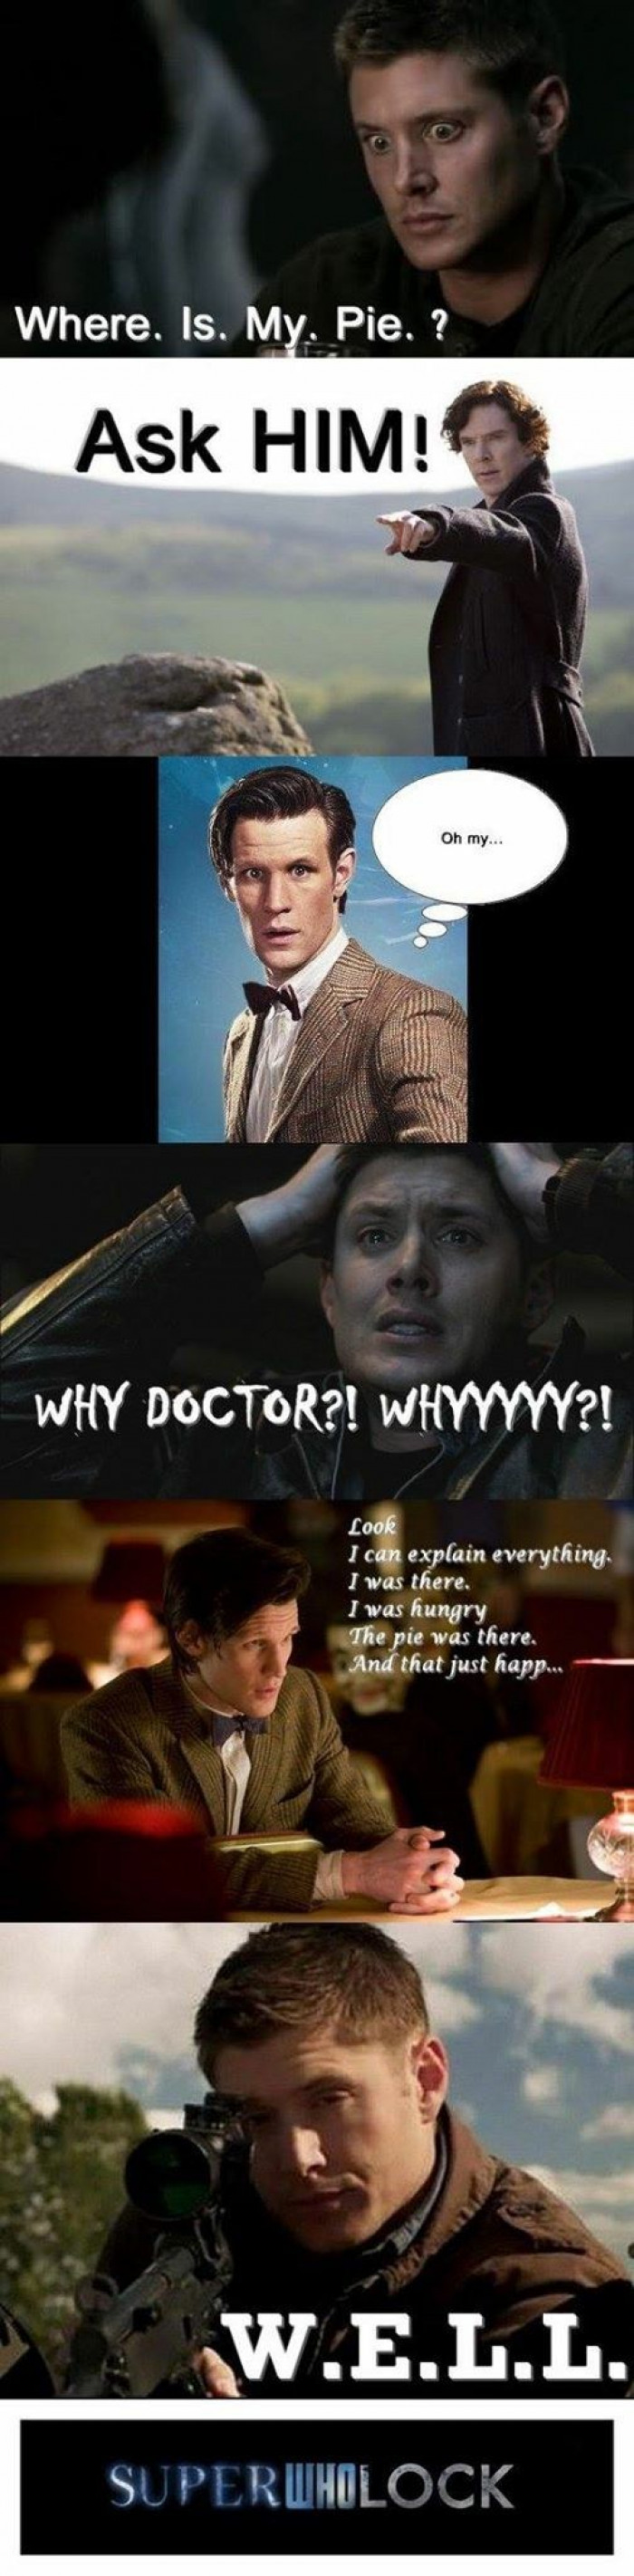 Dean Winchester Meets Doctor Who